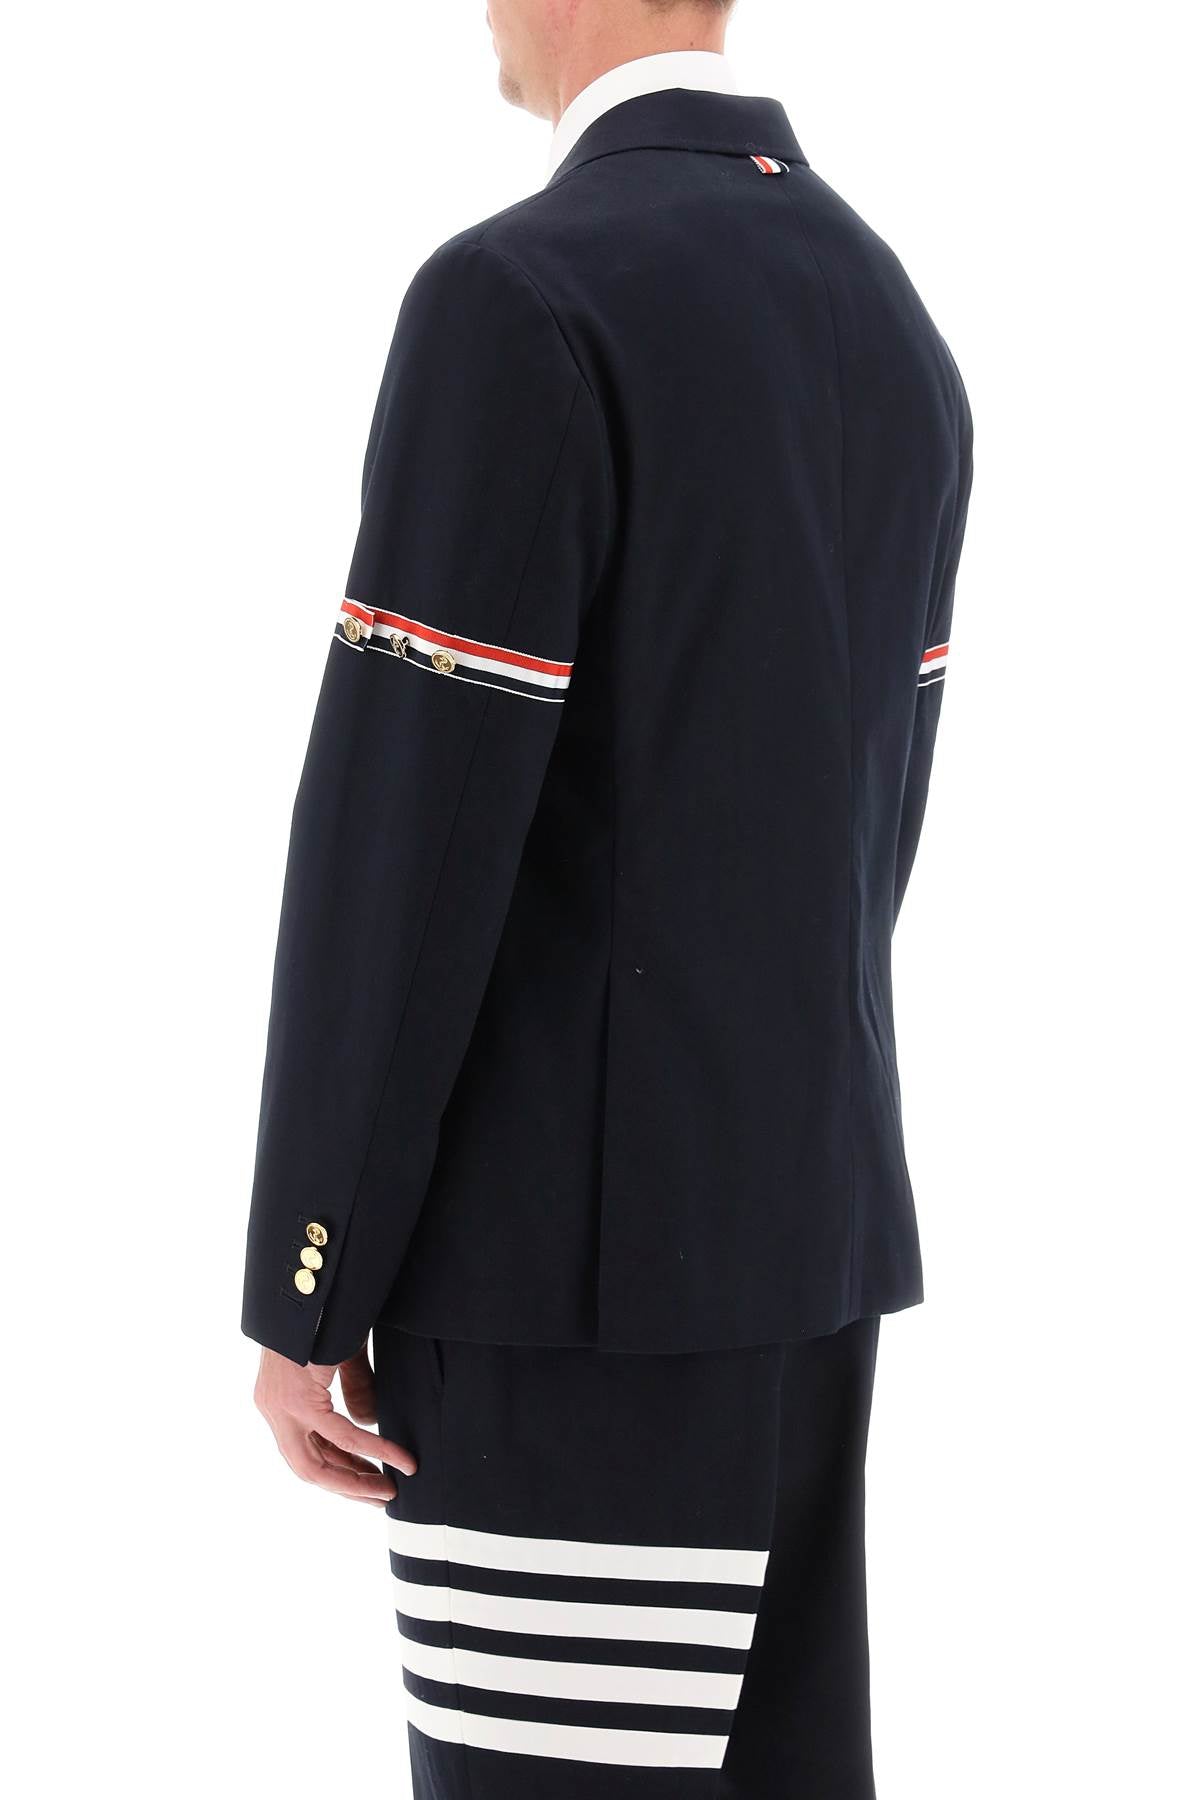 Thom browne deconstructed jacket with tricolor bands-2